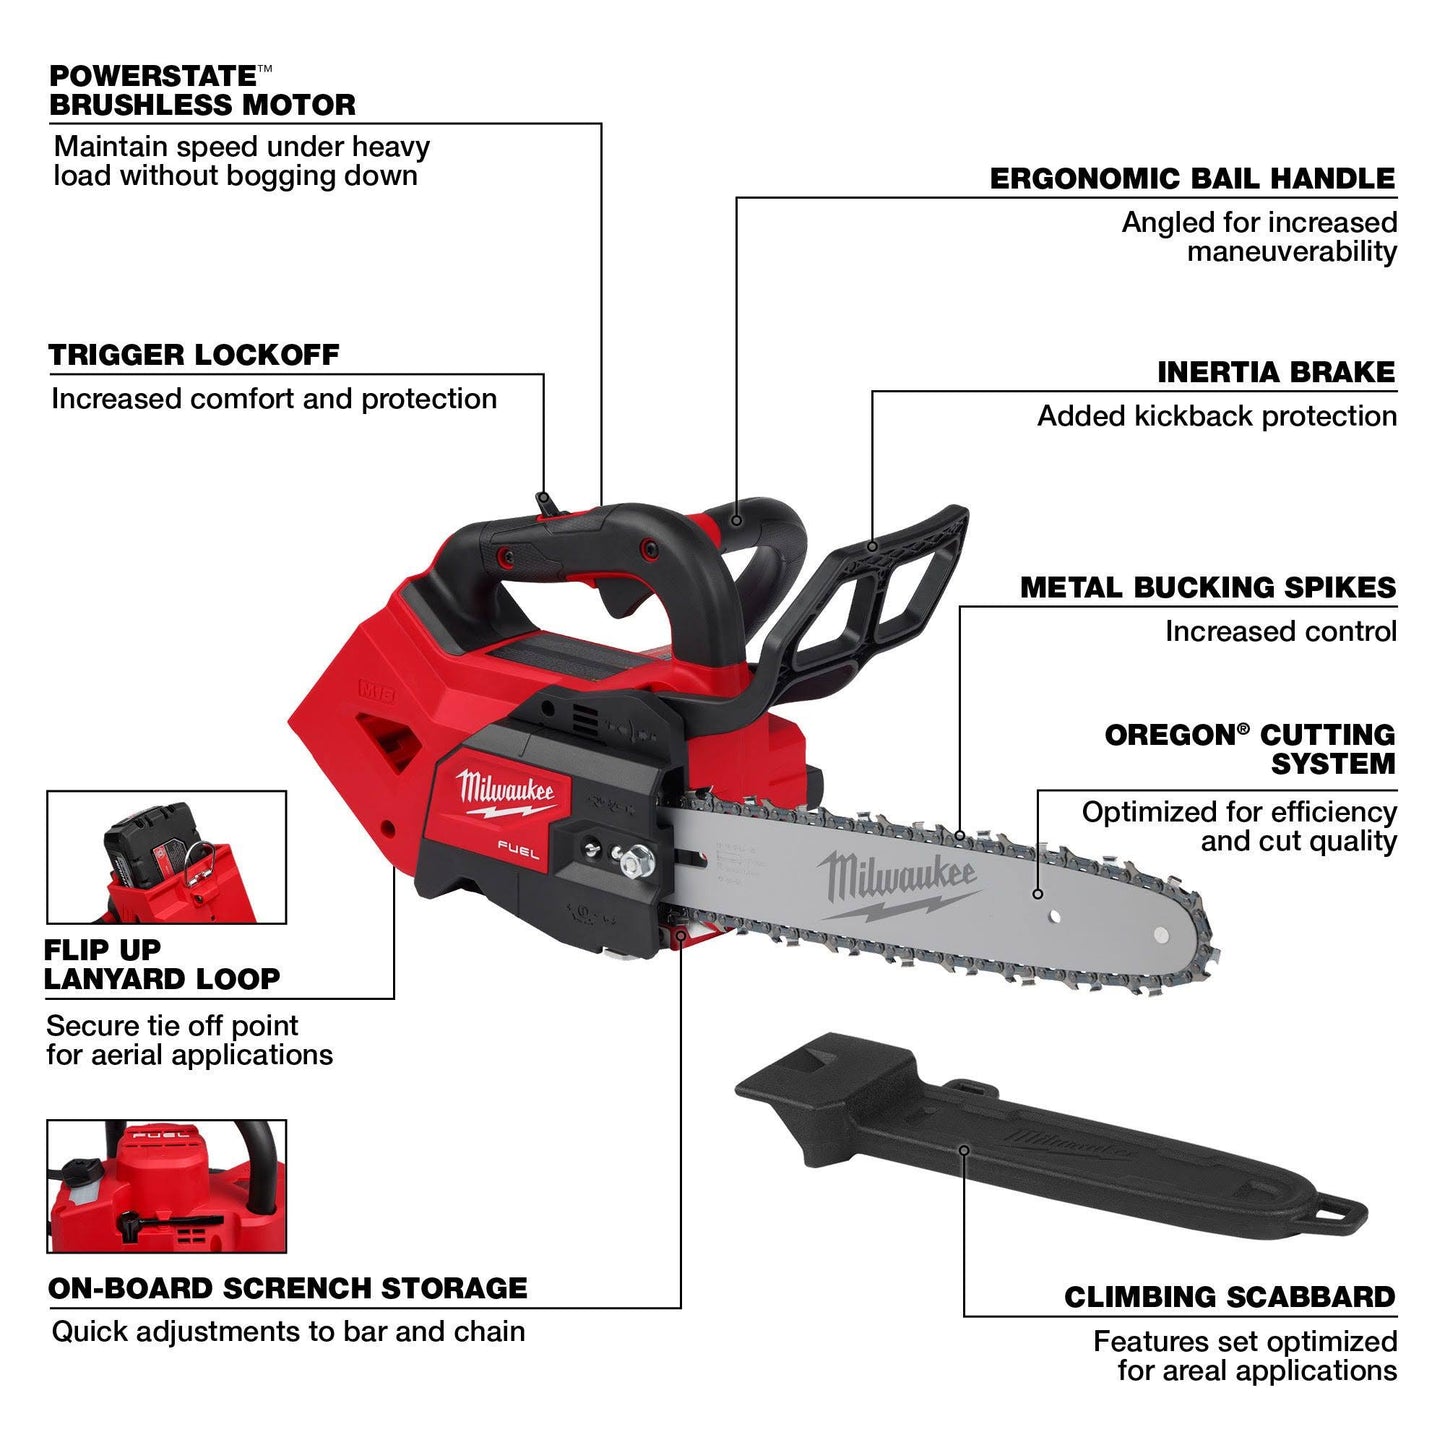 Milwaukee 2826-20C M18 Fuel 12" Top Handle Chainsaw (Tool Only)